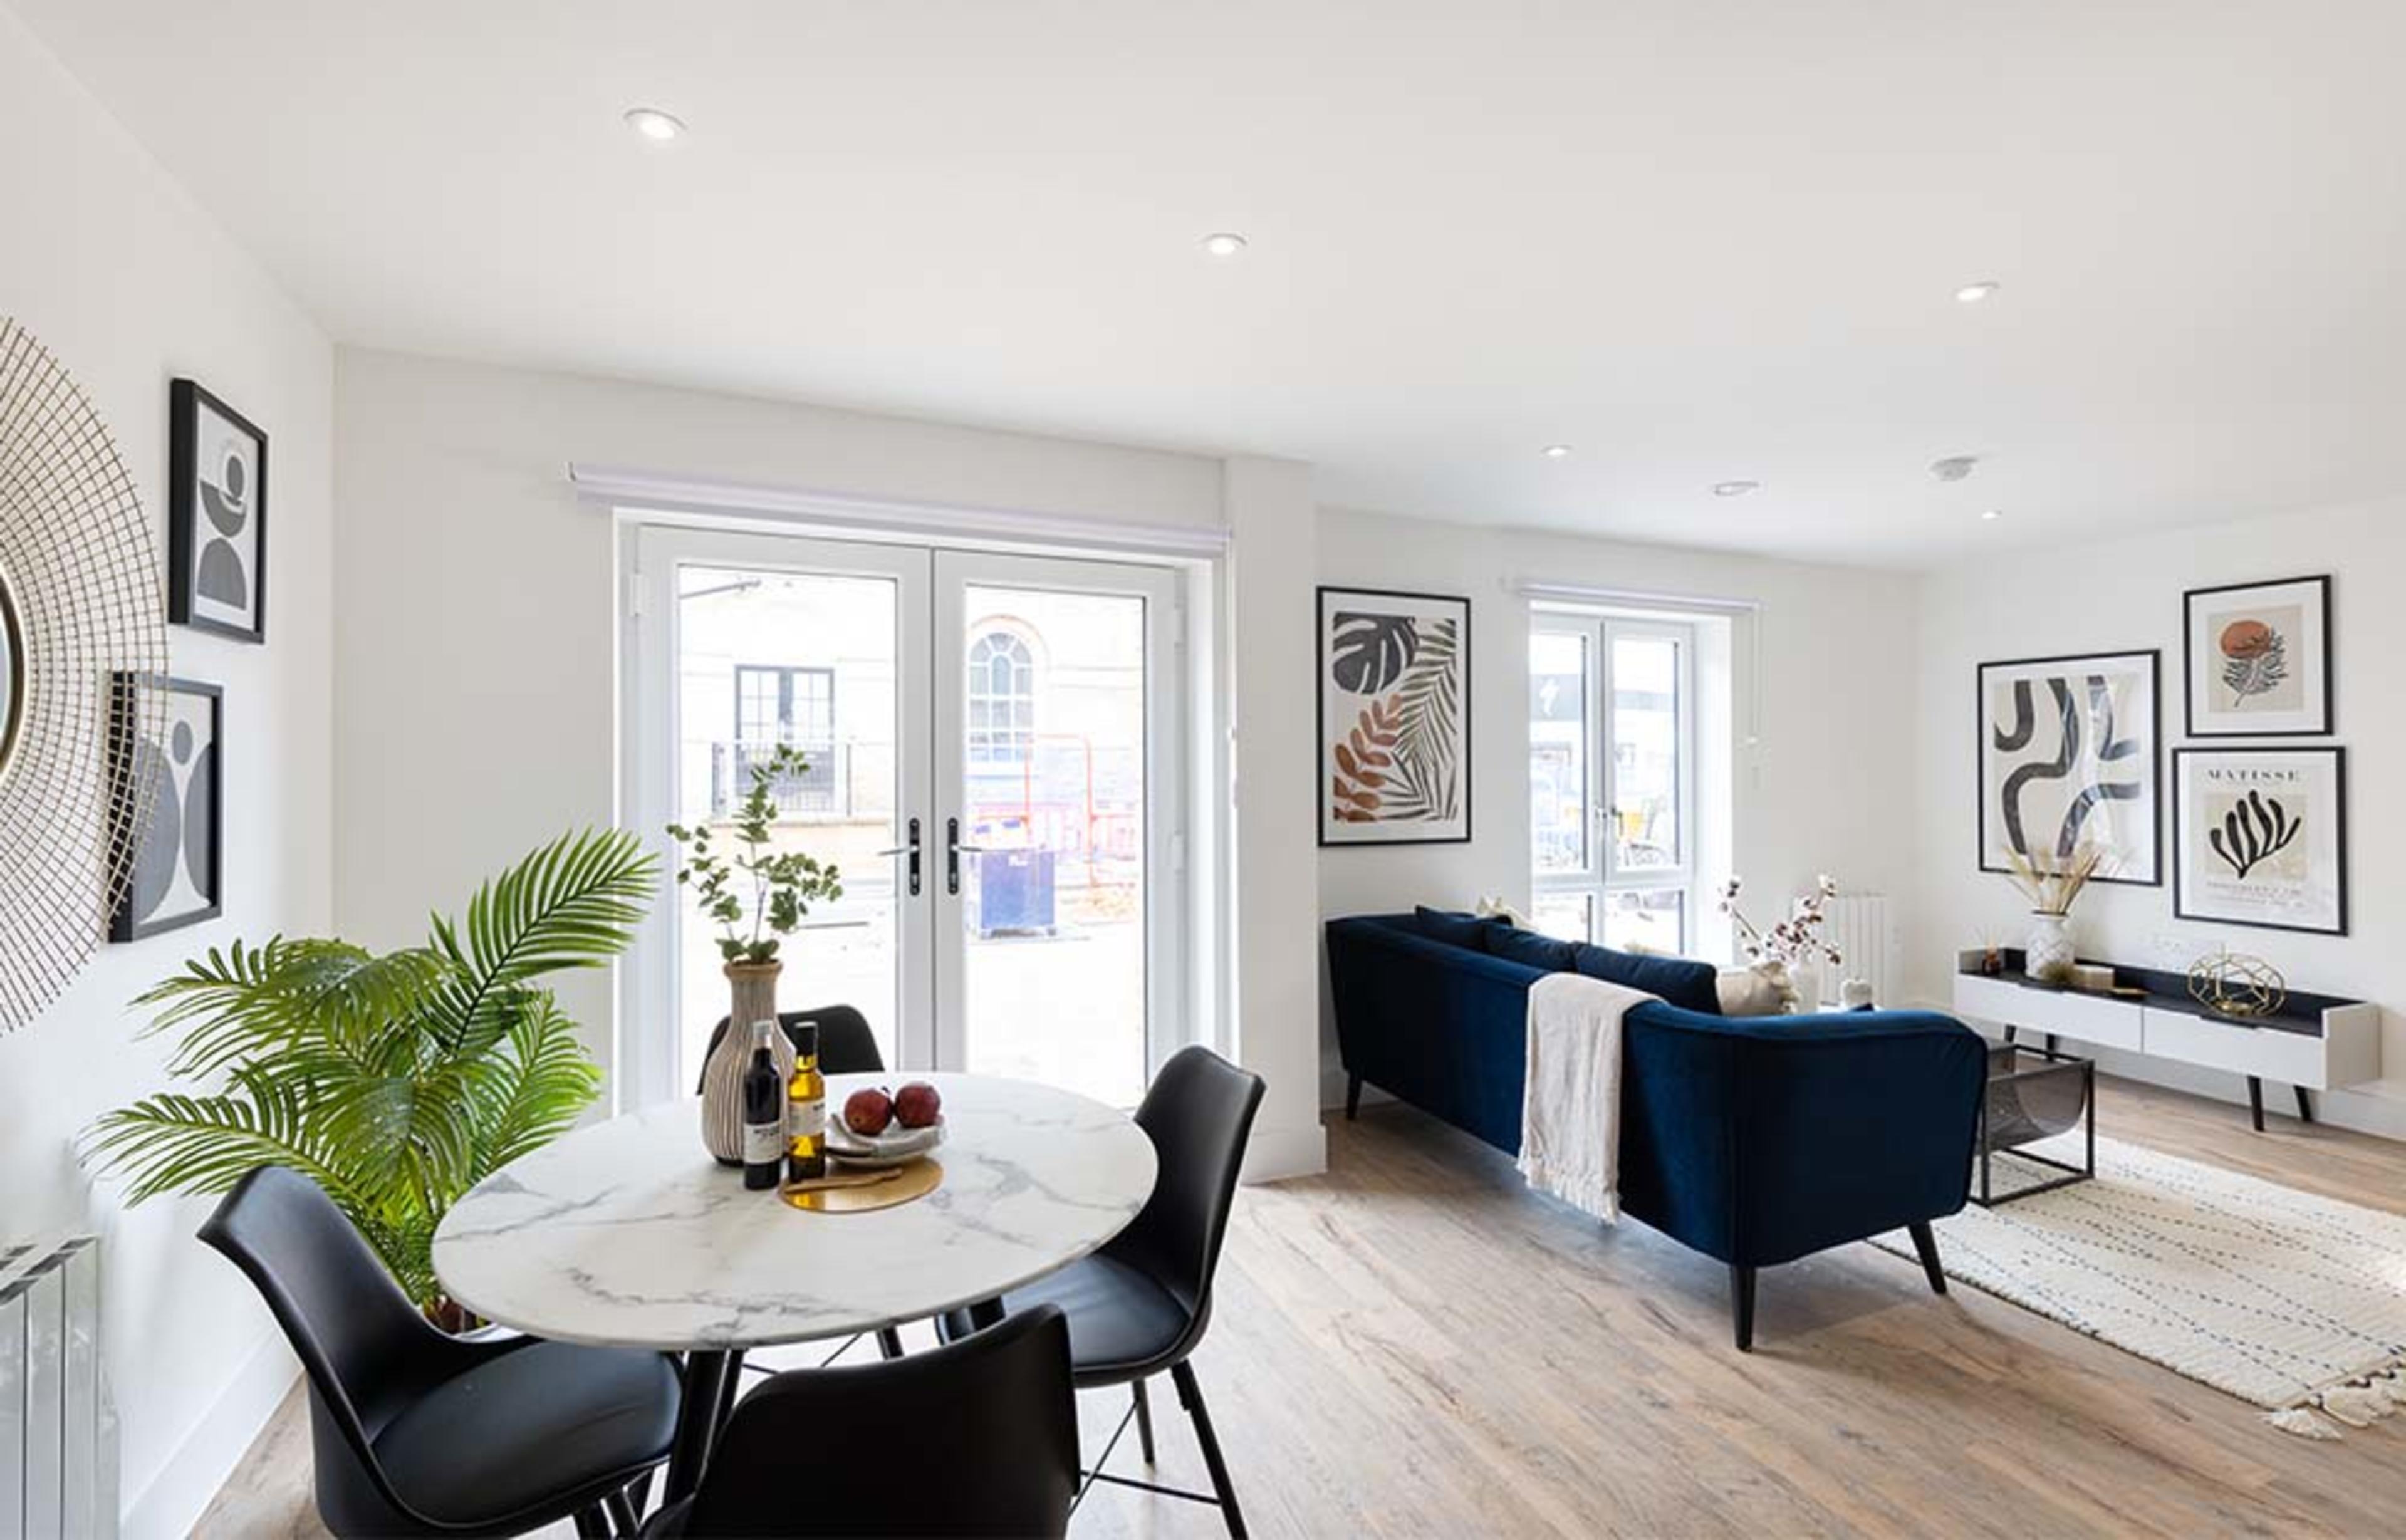 Bowlers Court open plan dining and living room